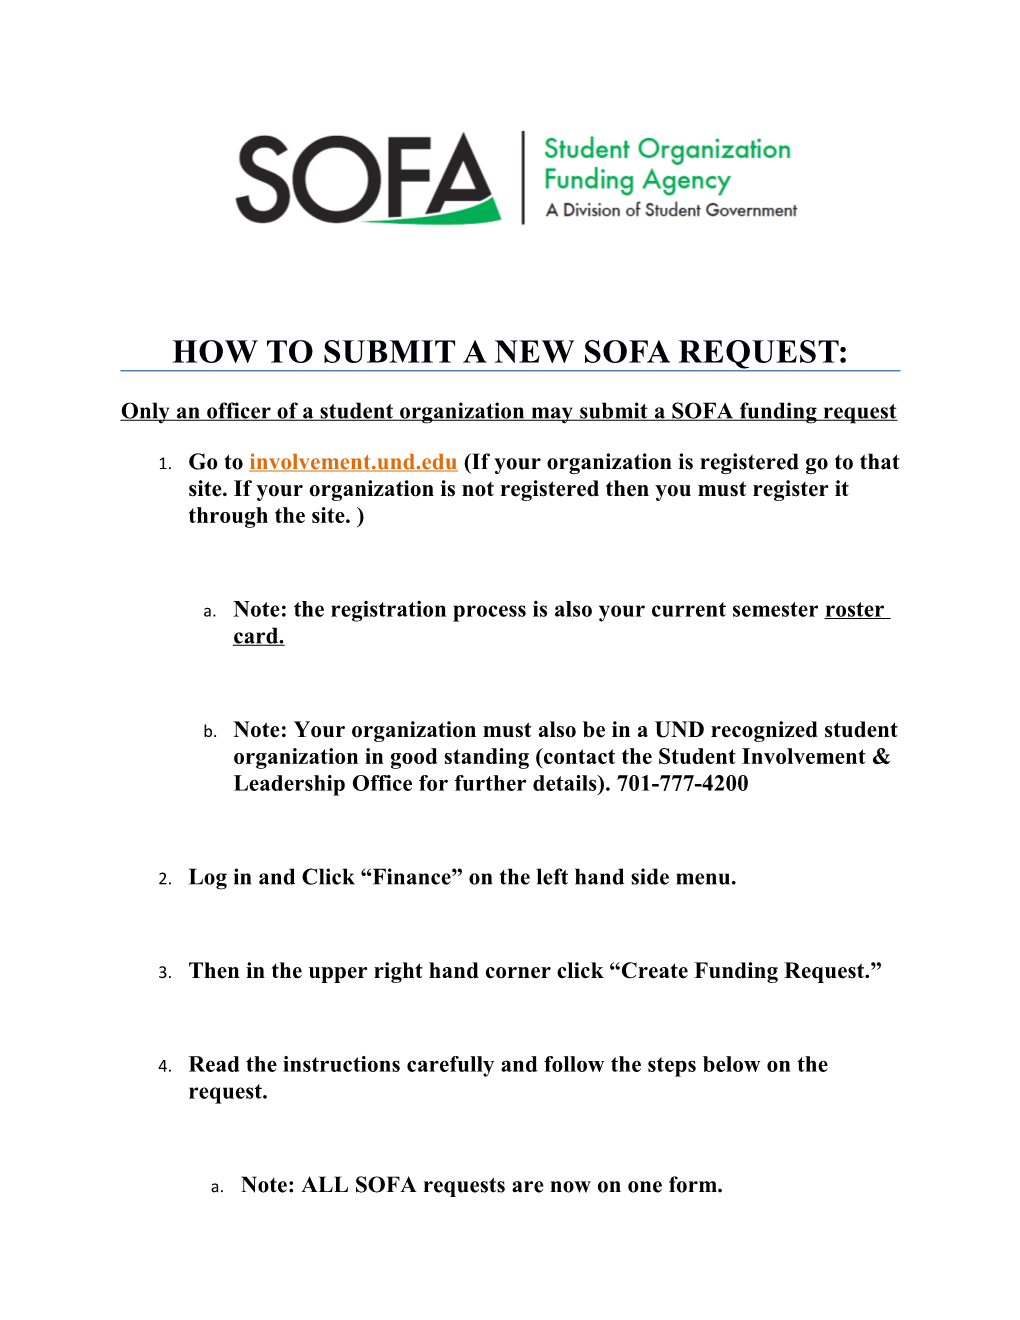 How to Submit a New Sofa Request